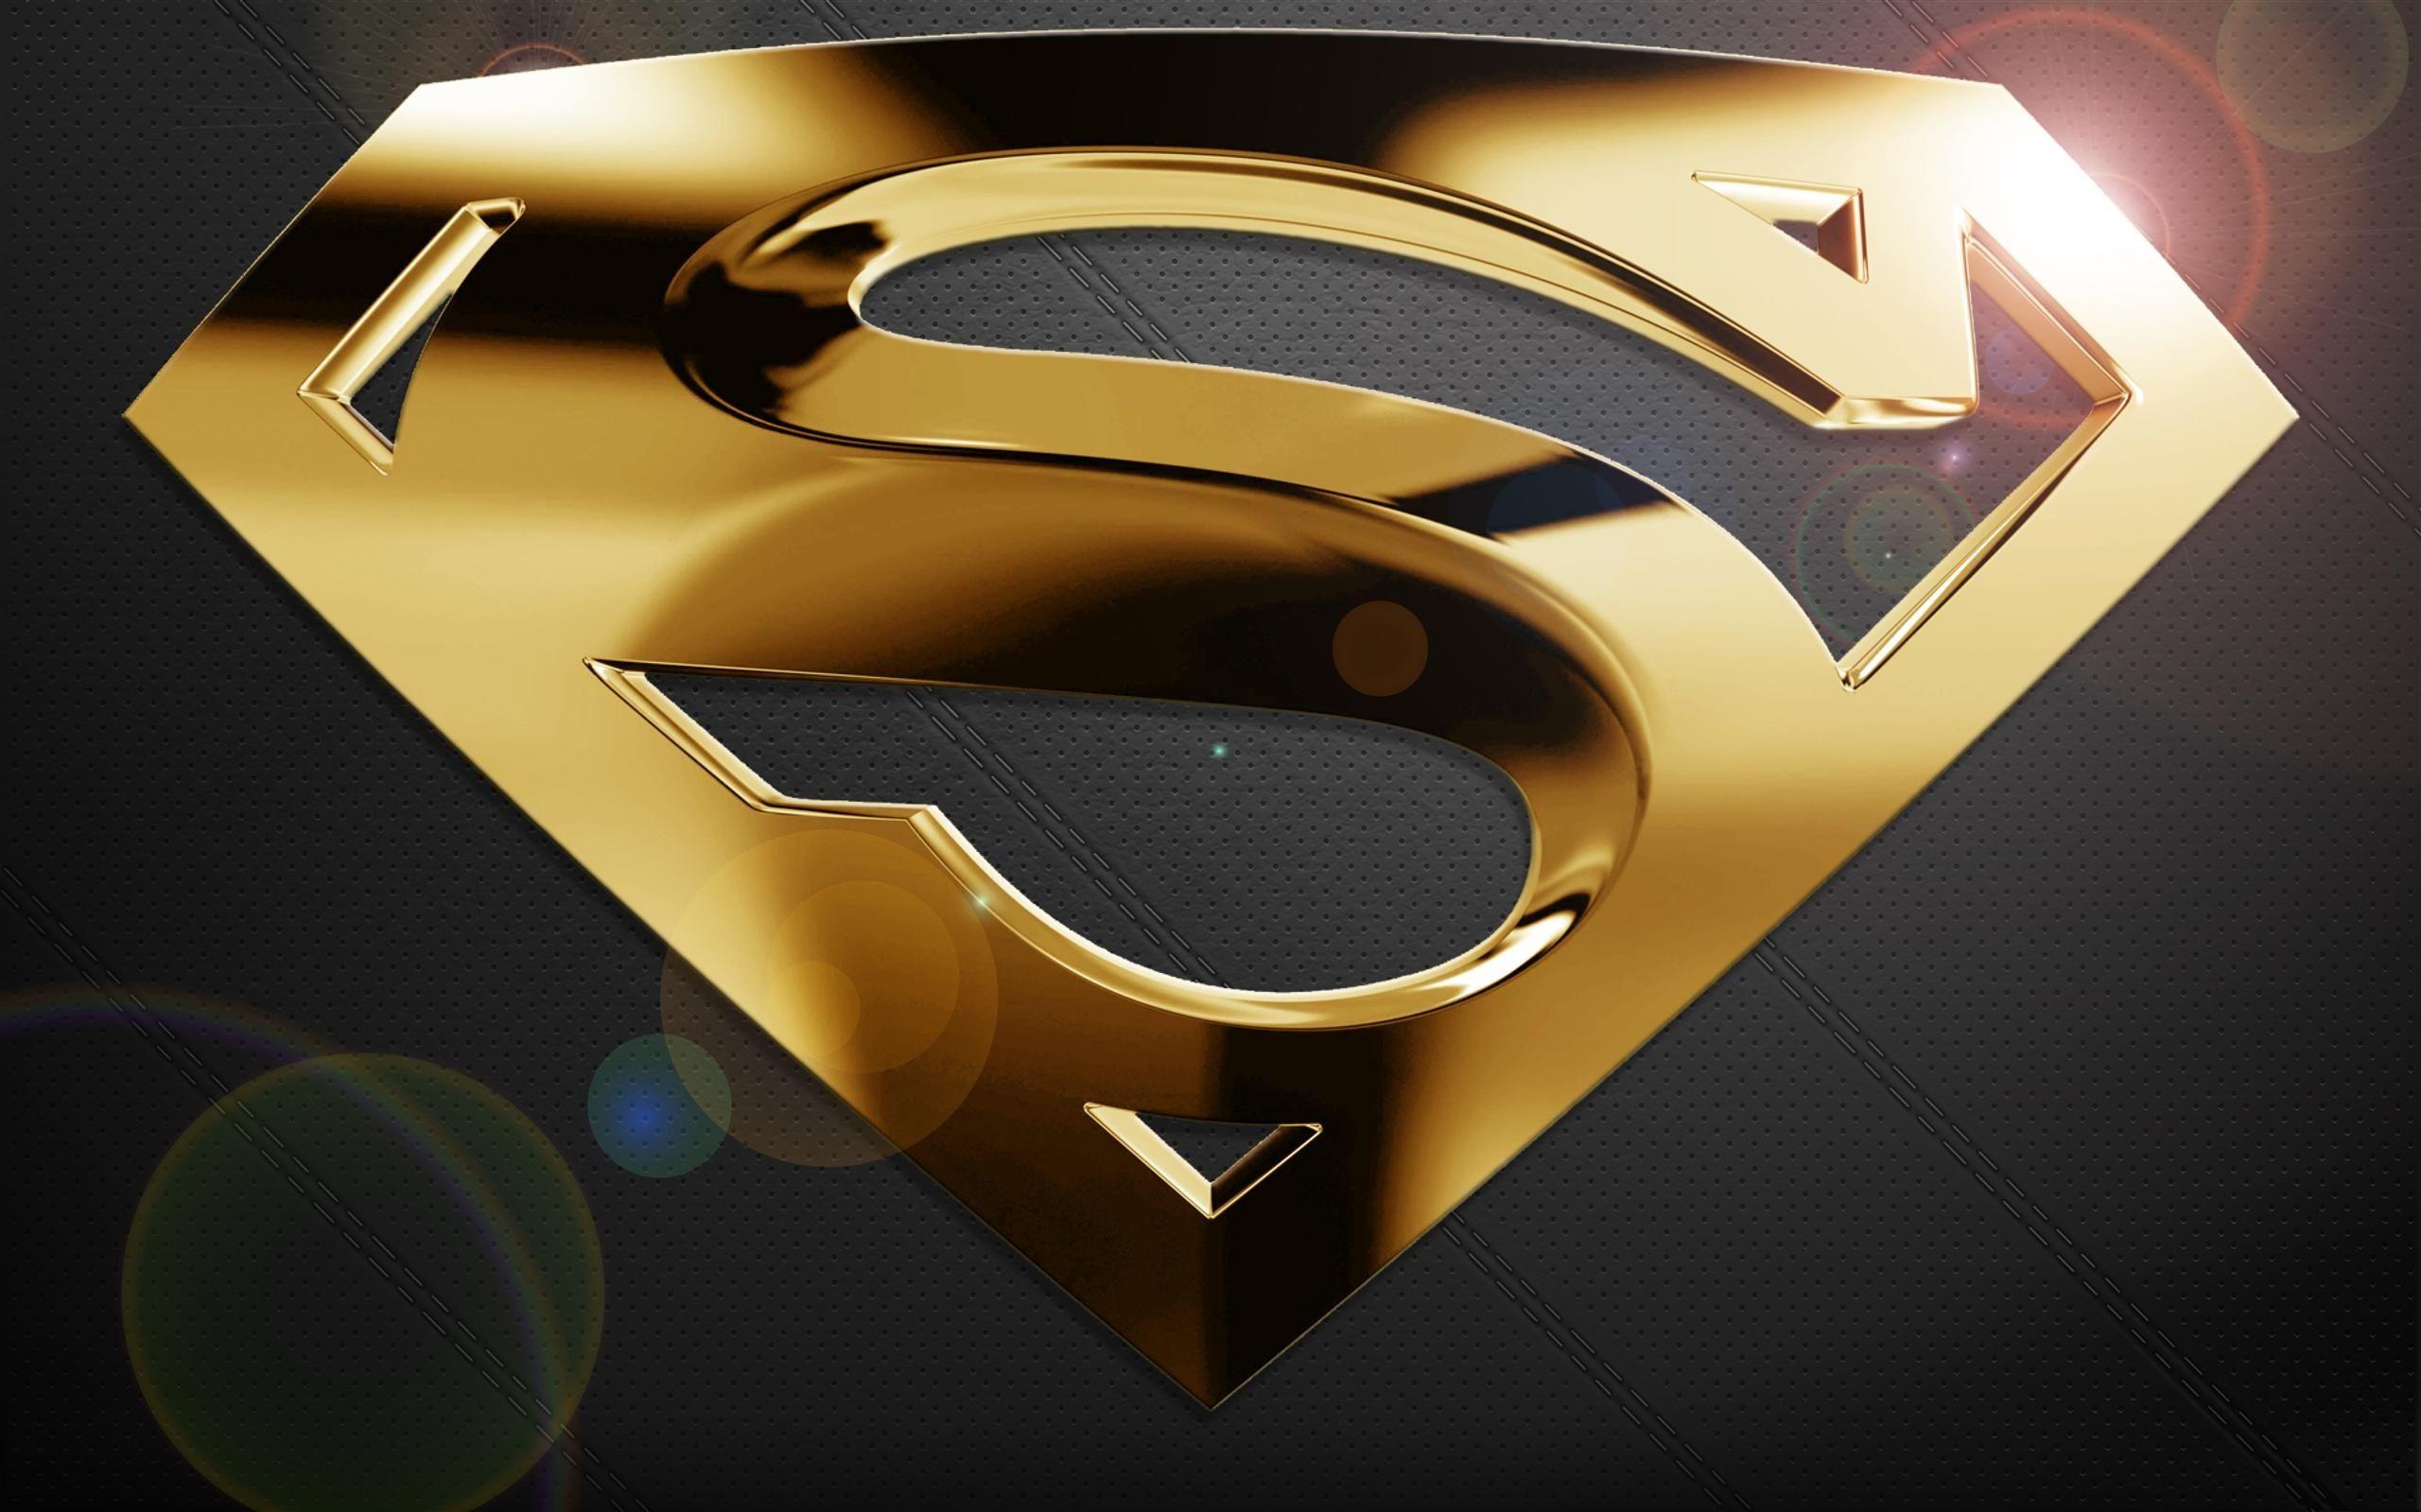 3D Superman Wallpaper Background Top Rated Image Free Download